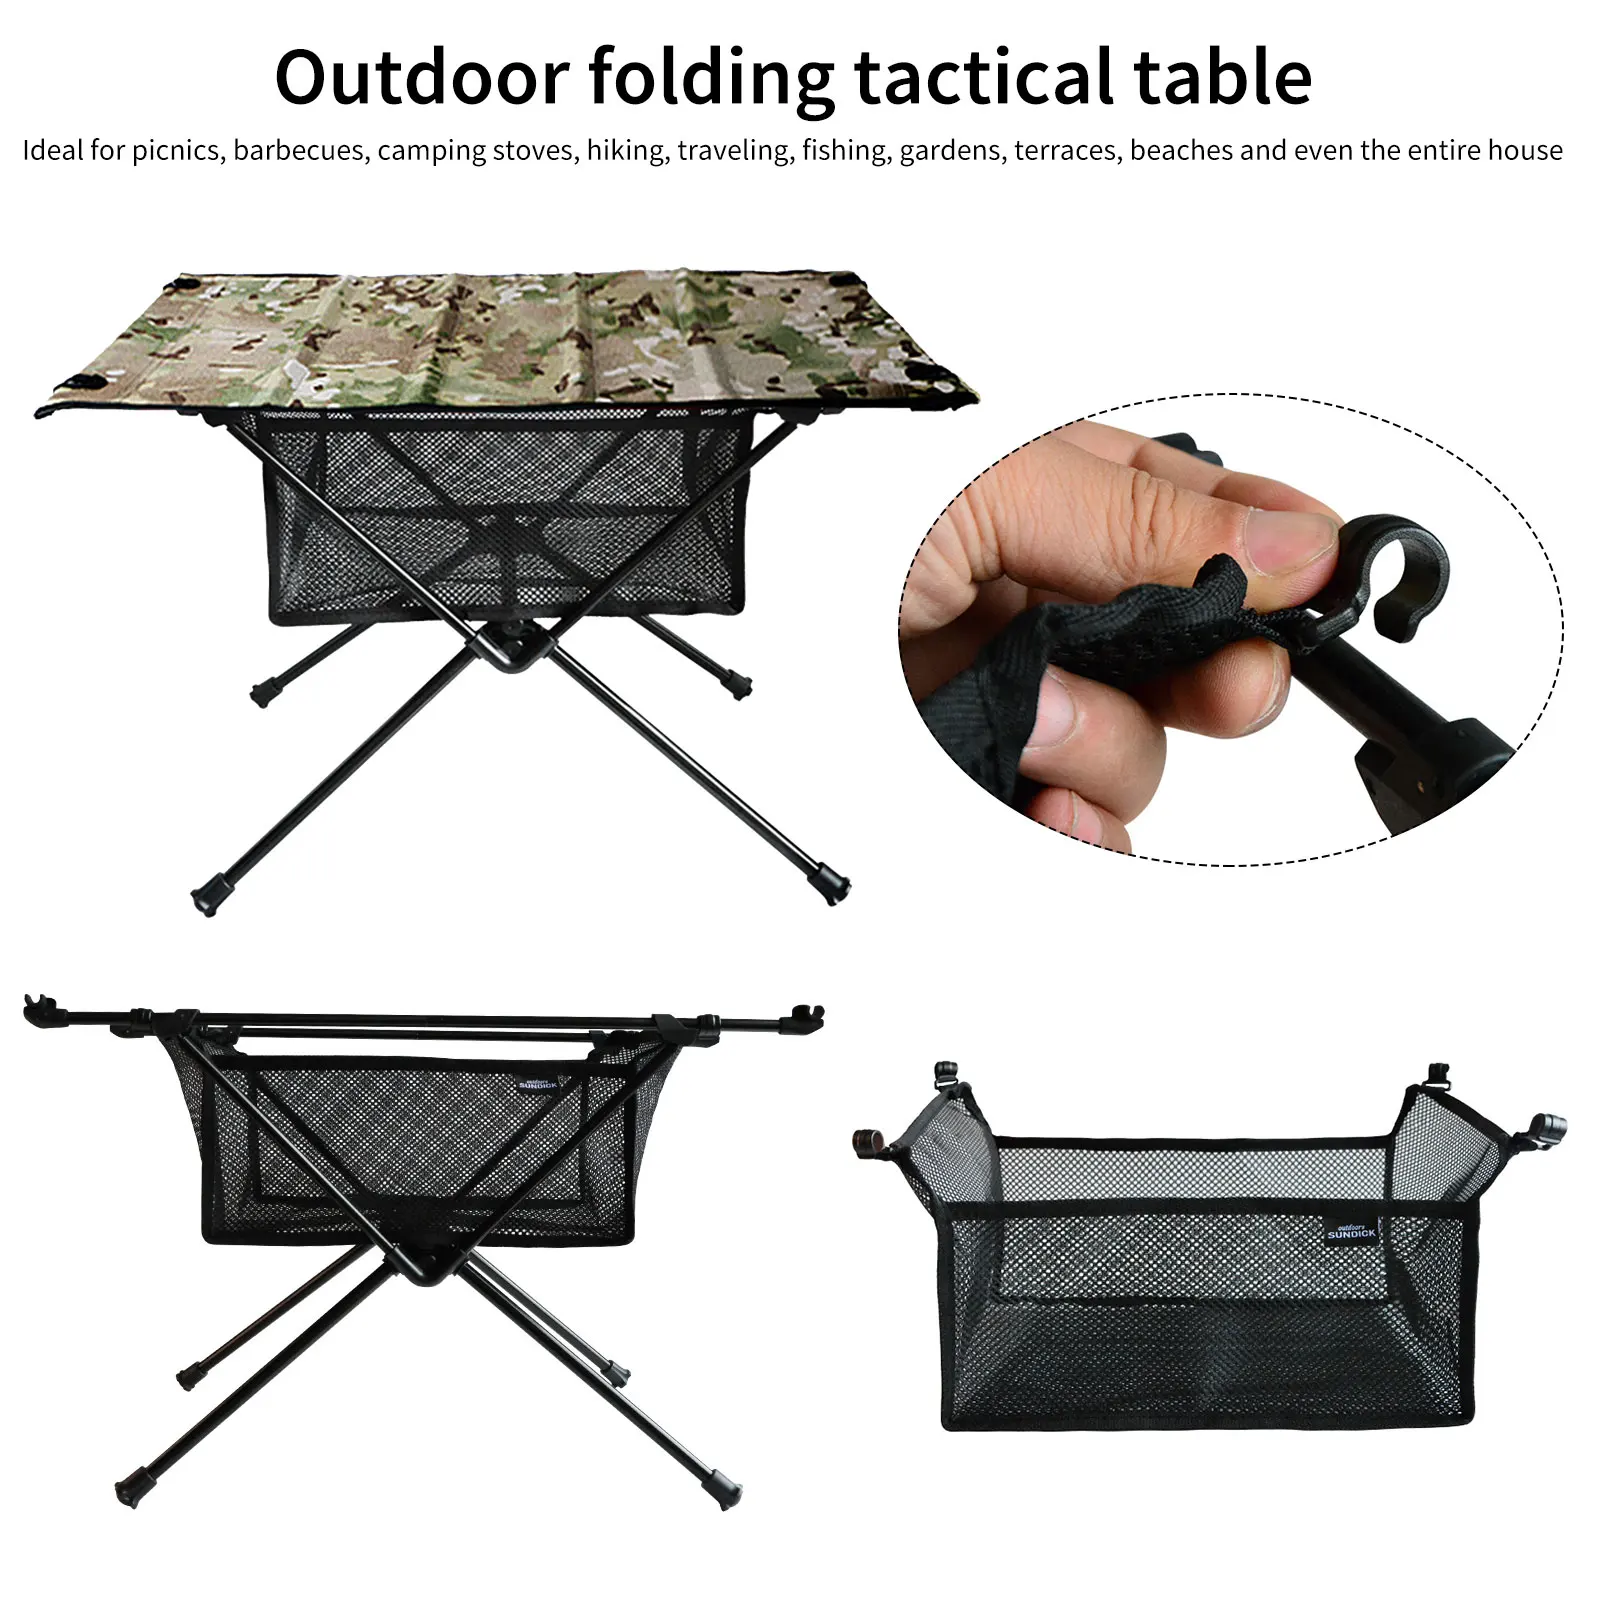 Outdoor Folding Table with Net Pocket Portable Foldable Aluminum Alloy Desk for Picnic Camping Garden Barbecue Desk Table